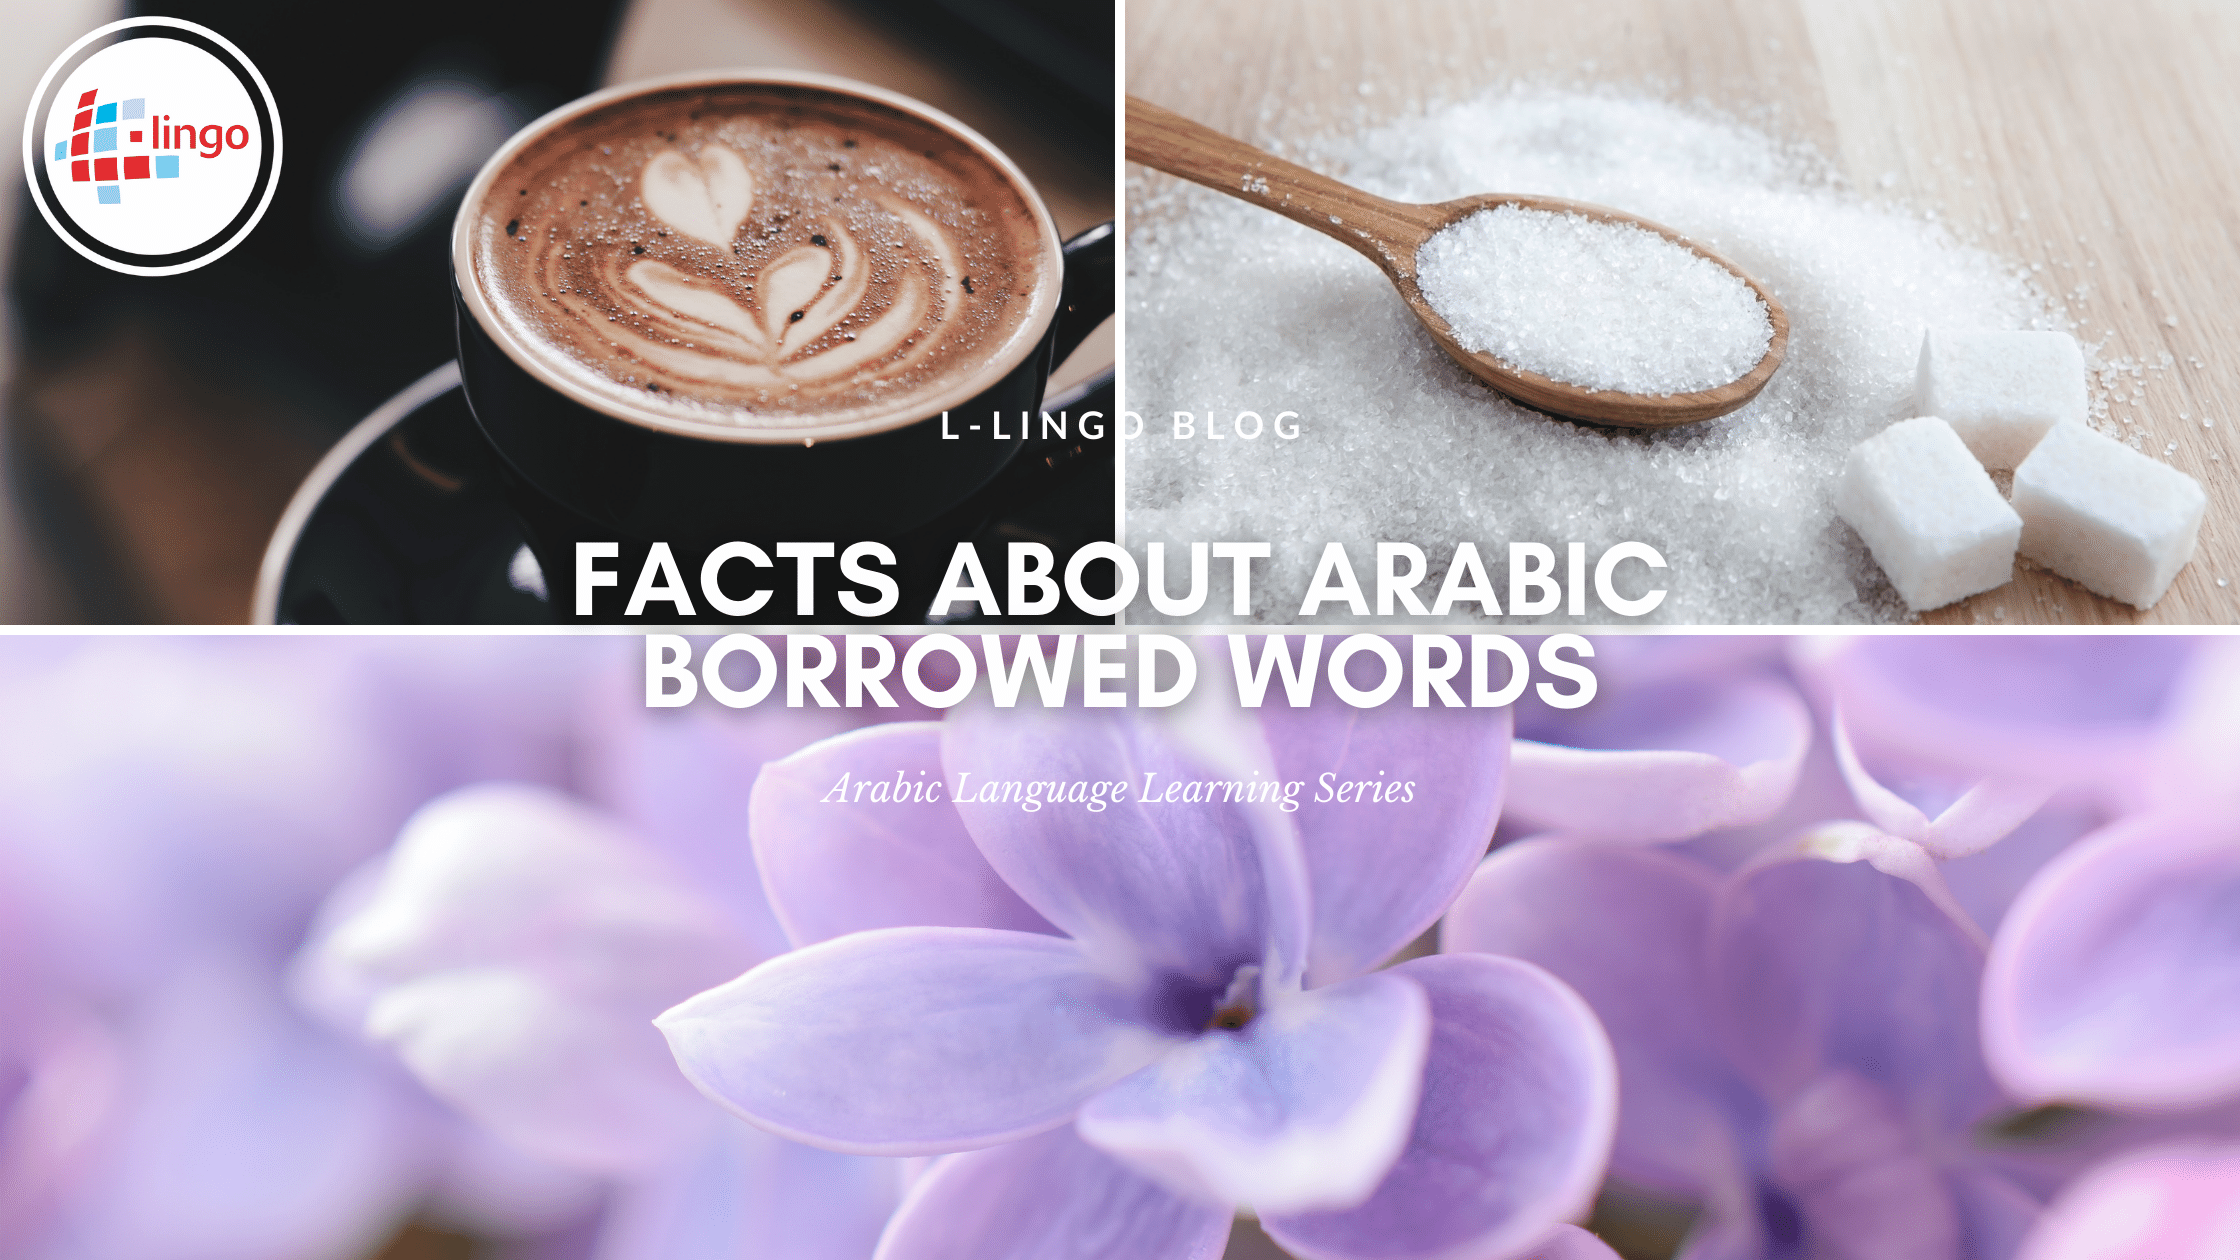 Facts About Arabic L-Lingo Blog: Borrowed Words